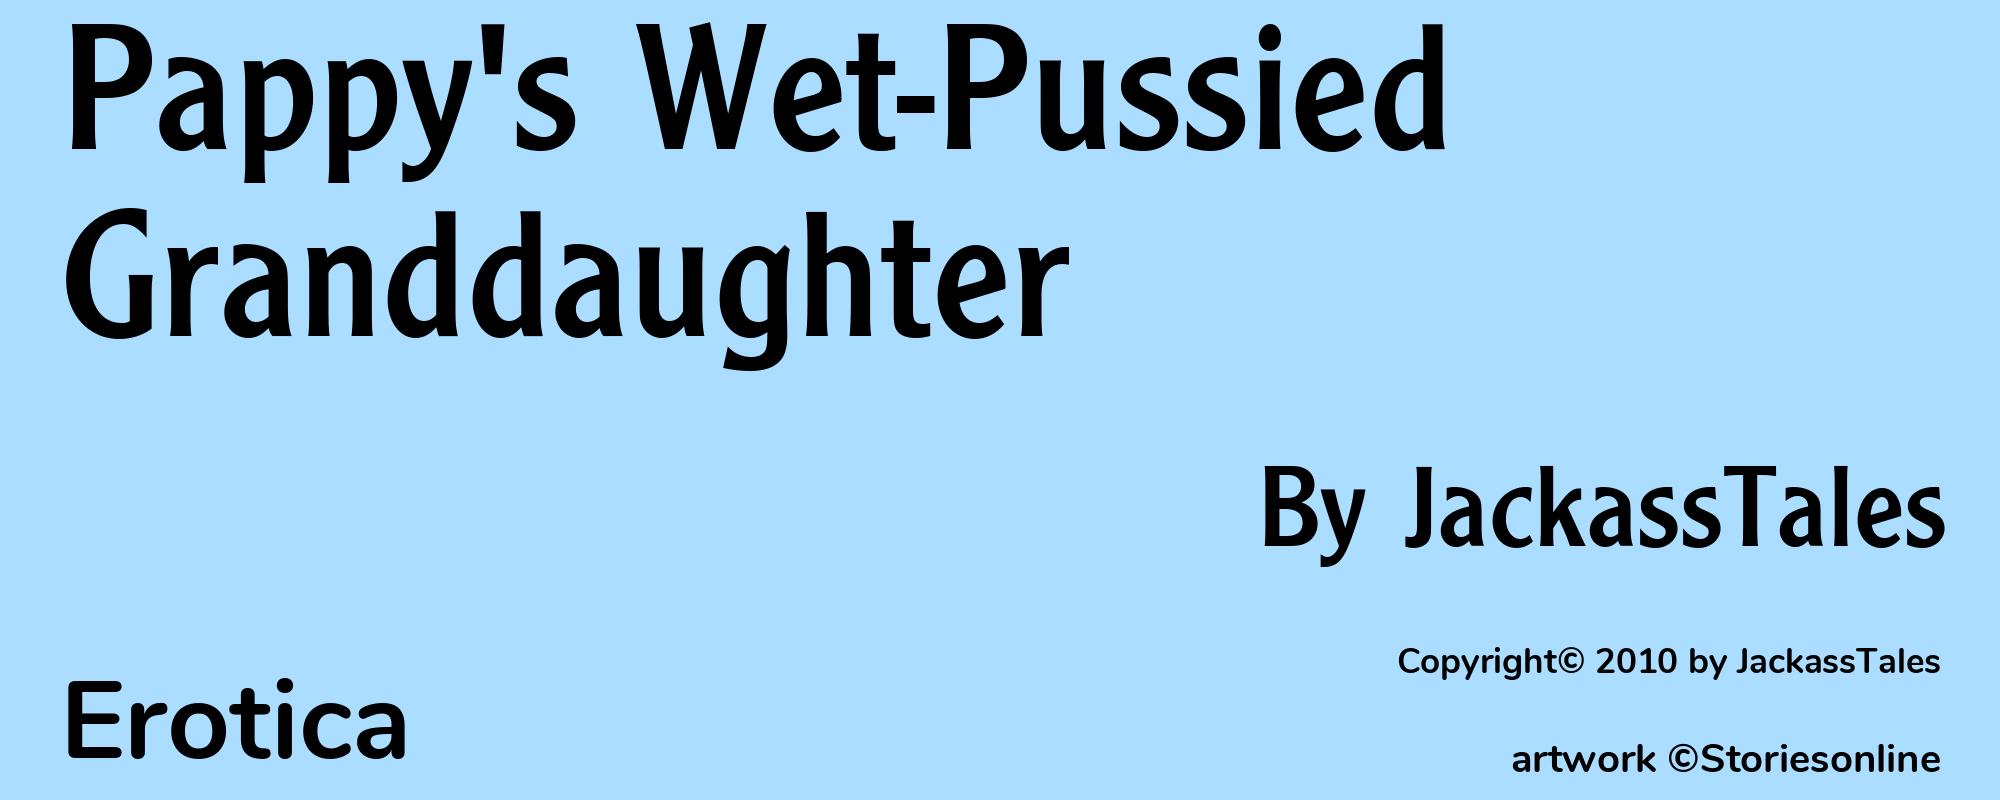 Pappy's Wet-Pussied Granddaughter - Cover